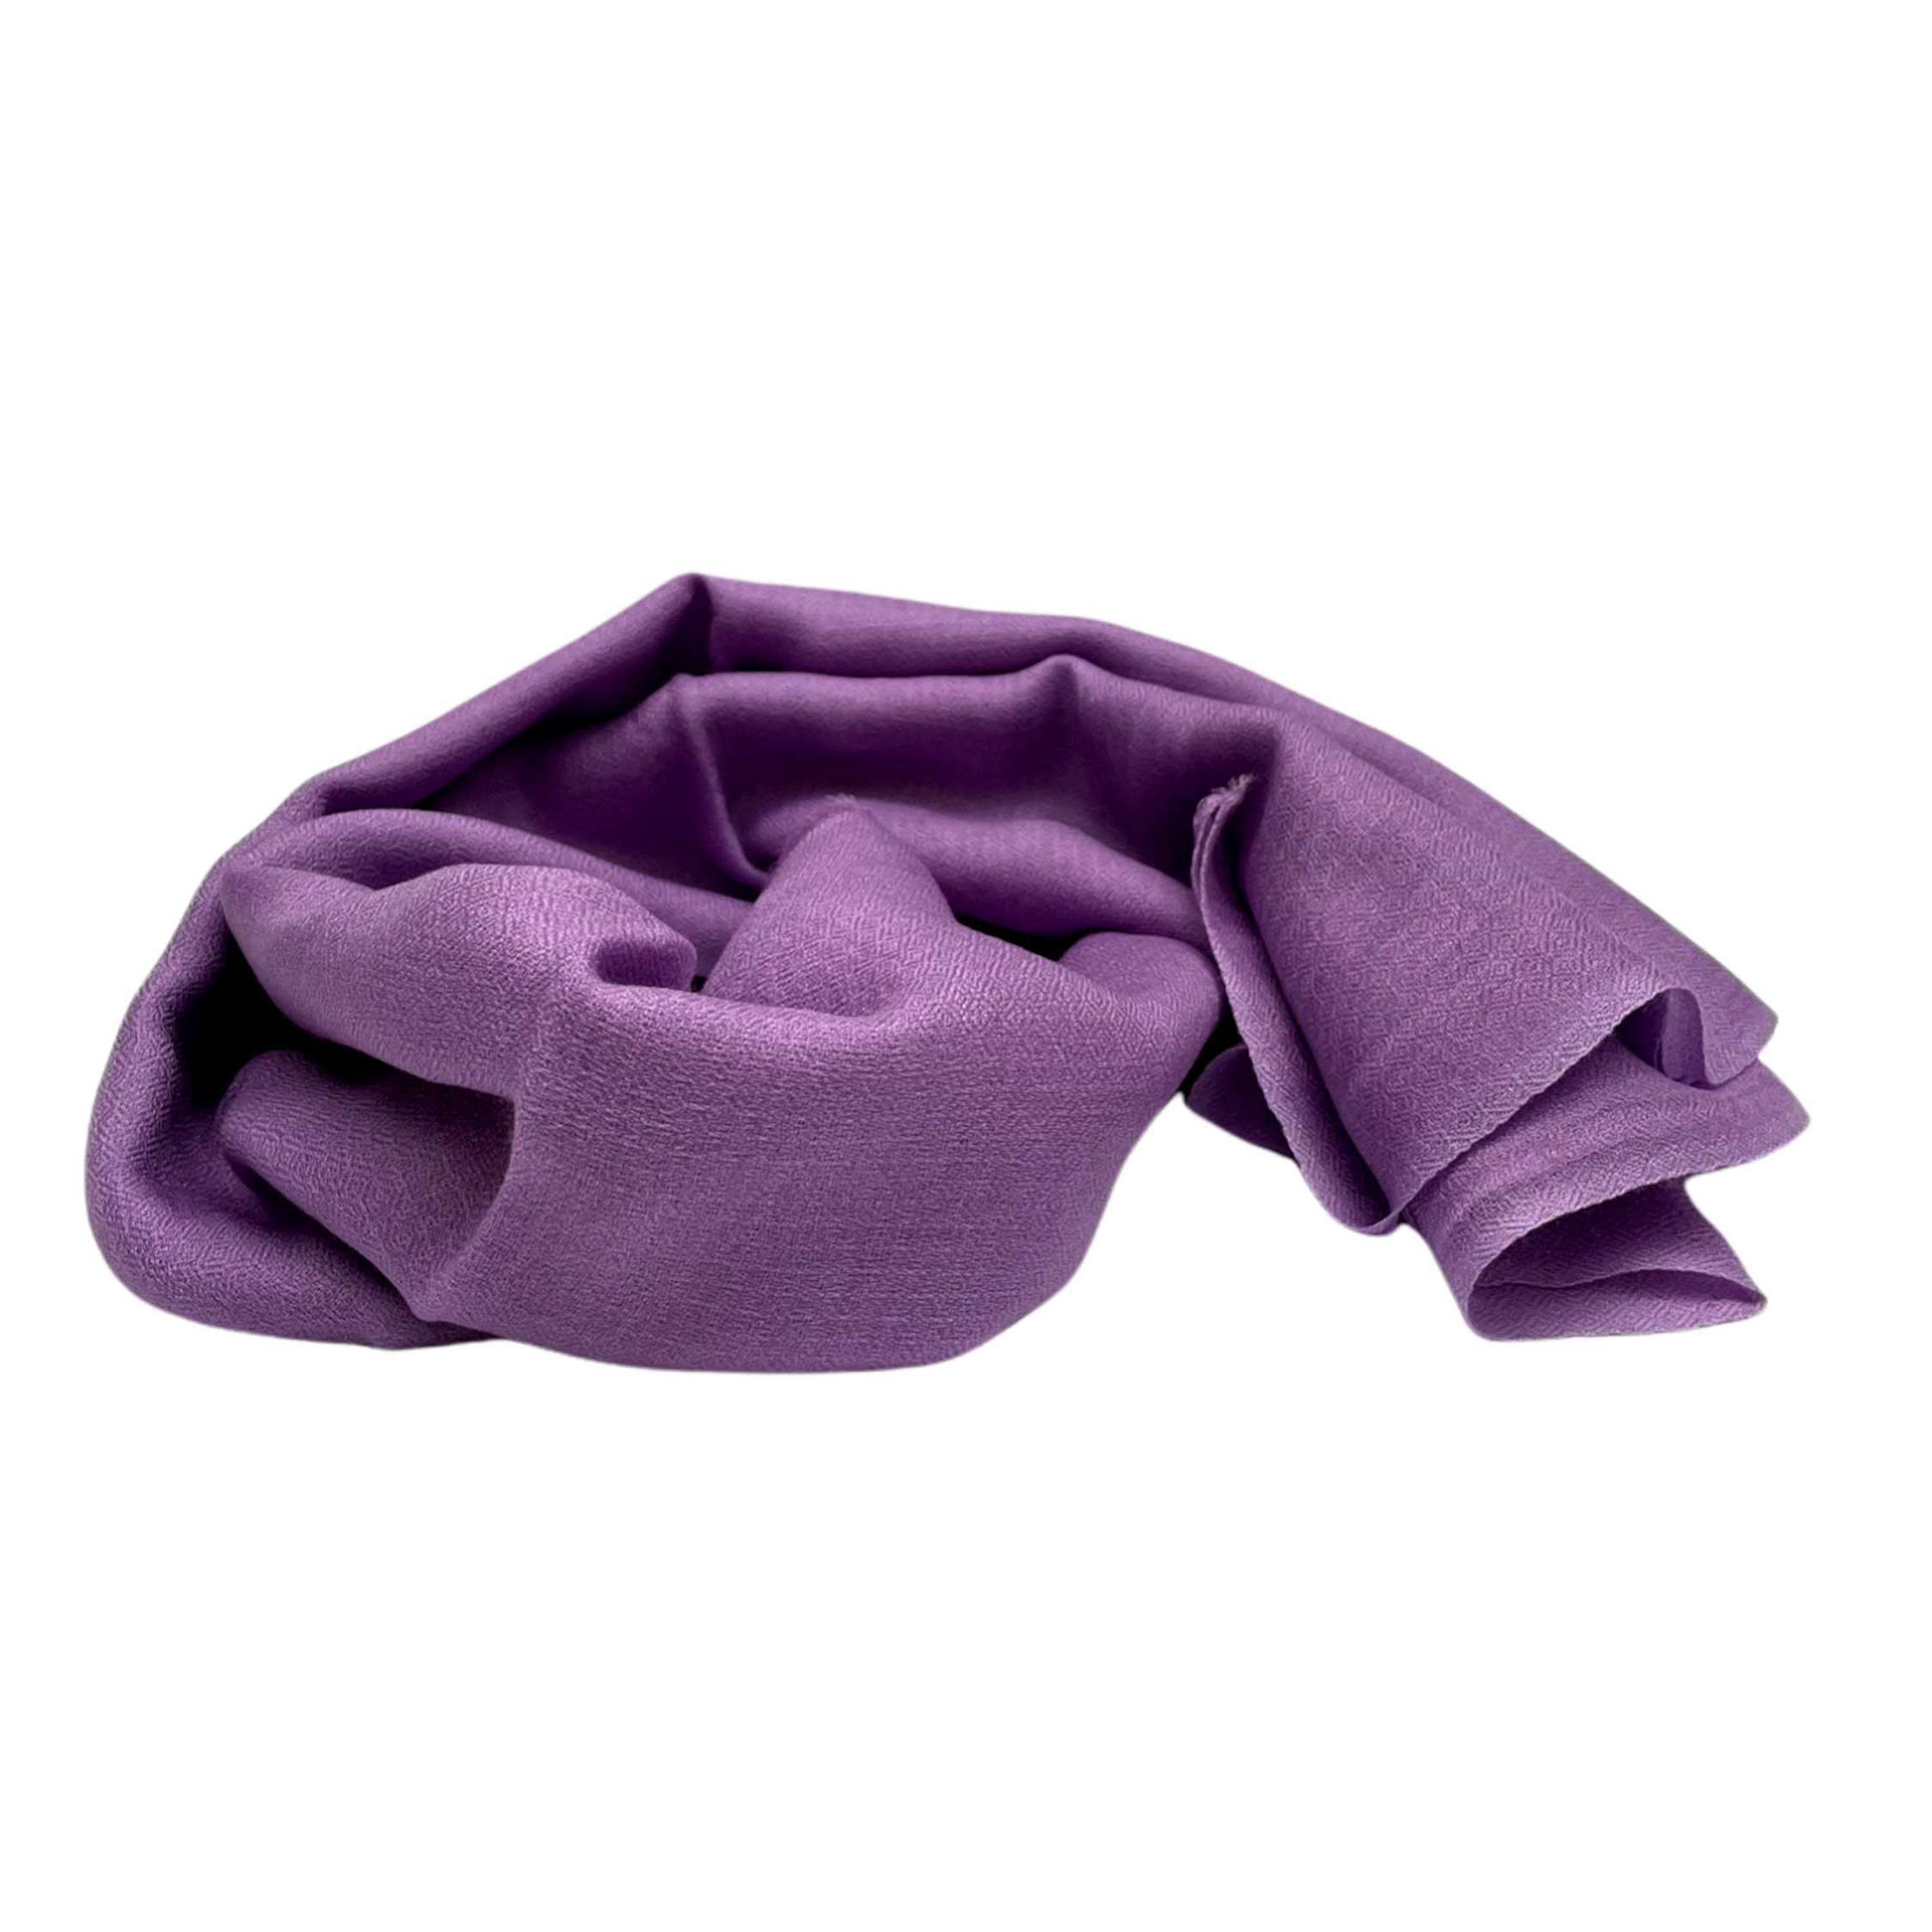 Ring Shawl,a Thin, Soft, And Light Shawl For All-weather Use, Two-ply Wool, Real Pashmina Wool, Purple